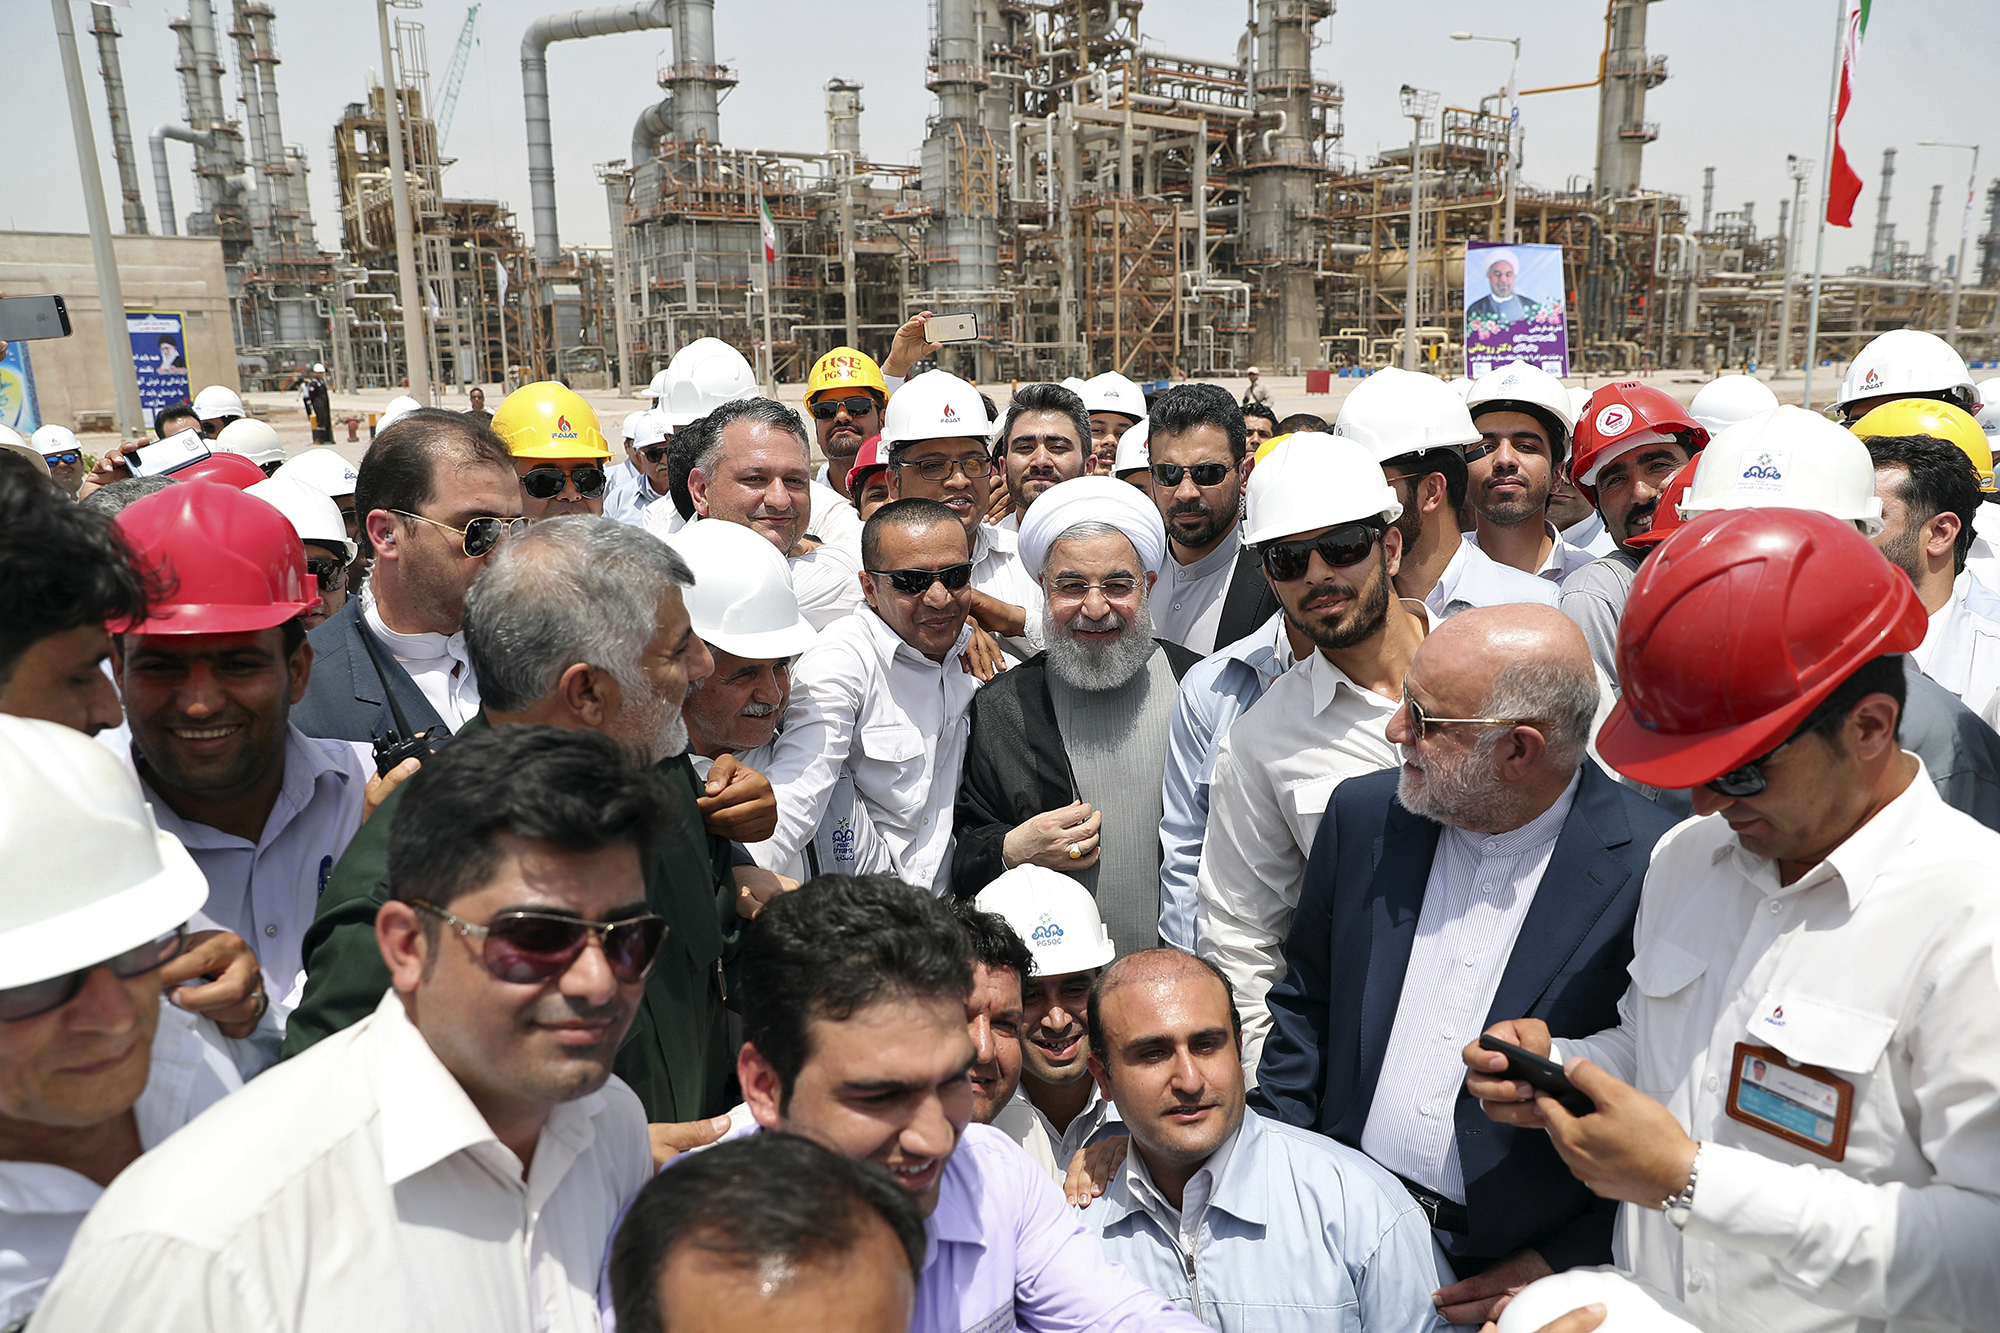 eleased by an official website of the office of the Iranian Presidency, Iranian President Hassan Rouhani, center, inaugurates the Persian Gulf Star Refinery in Bandar Abbas, Iran. Five Iranian tankers likely carrying at least $45.5 million worth of gasoline and similar products are now sailing to Venezuela as of Sunday, May 17, 2020, part of a wider deal between the two U.S.-sanctioned nations amid heightened tensions between Tehran and Washington. Analysts say the gasoline they carry came from the Persian Gulf Star Refinery. (Iranian Presidency Office via AP, File)